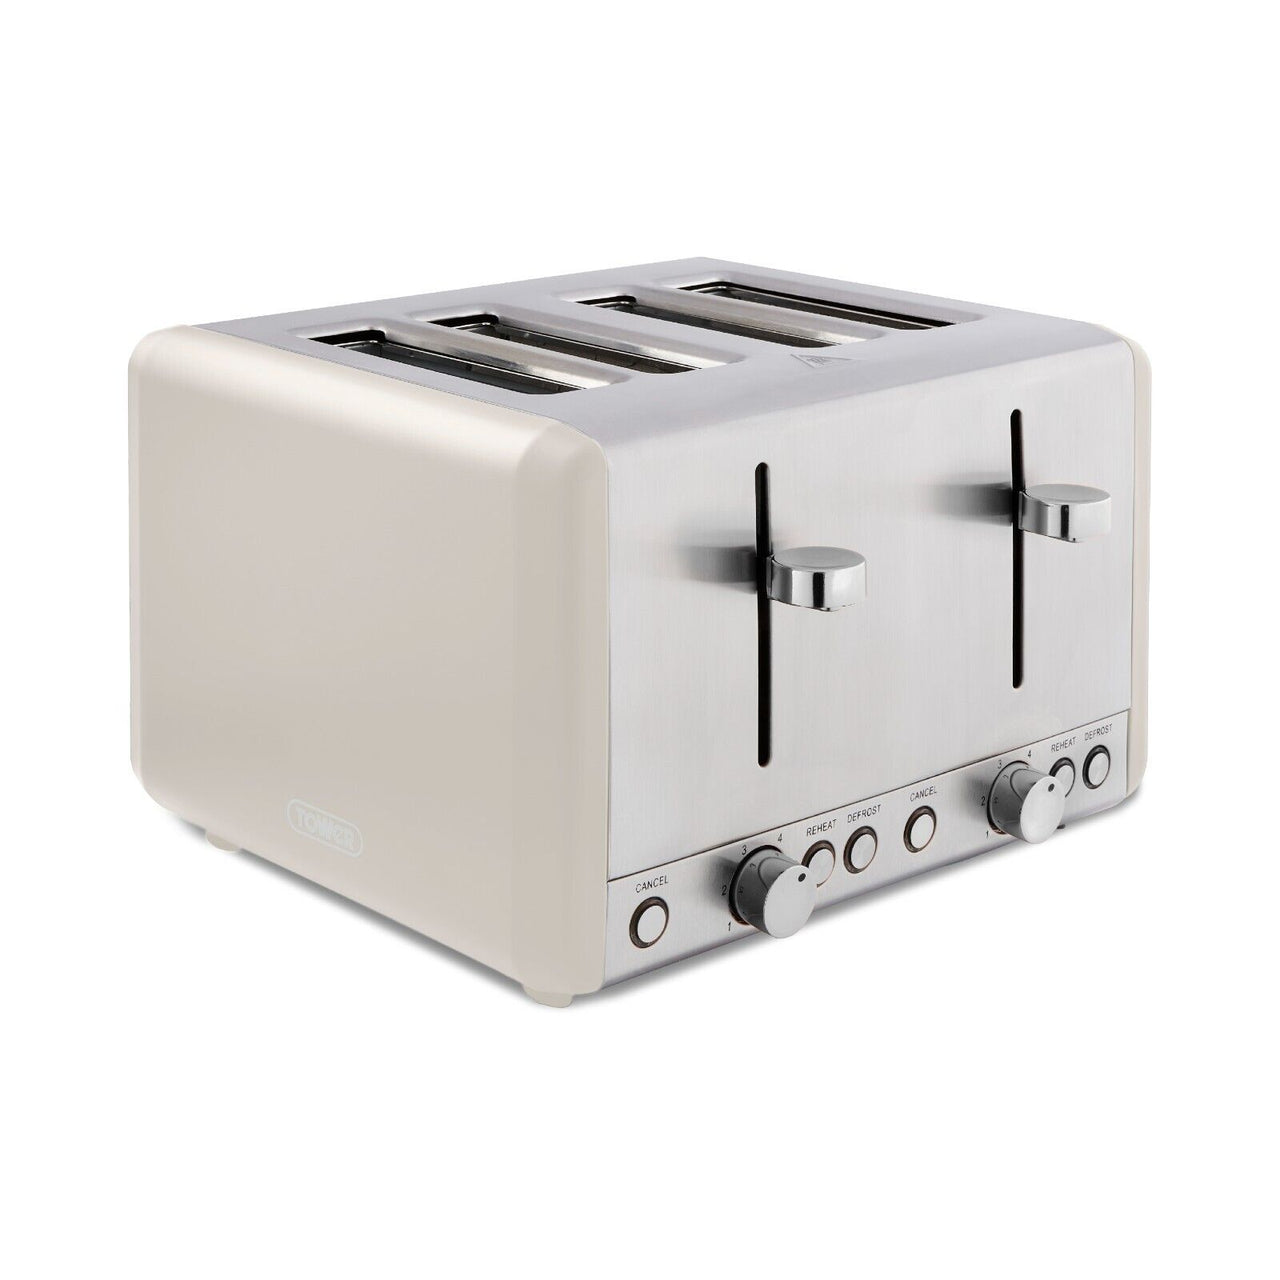 Tower Cavaletto 4 Slice Toaster Latte/Chrome Accents T20051MSH 3 Year Guarantee